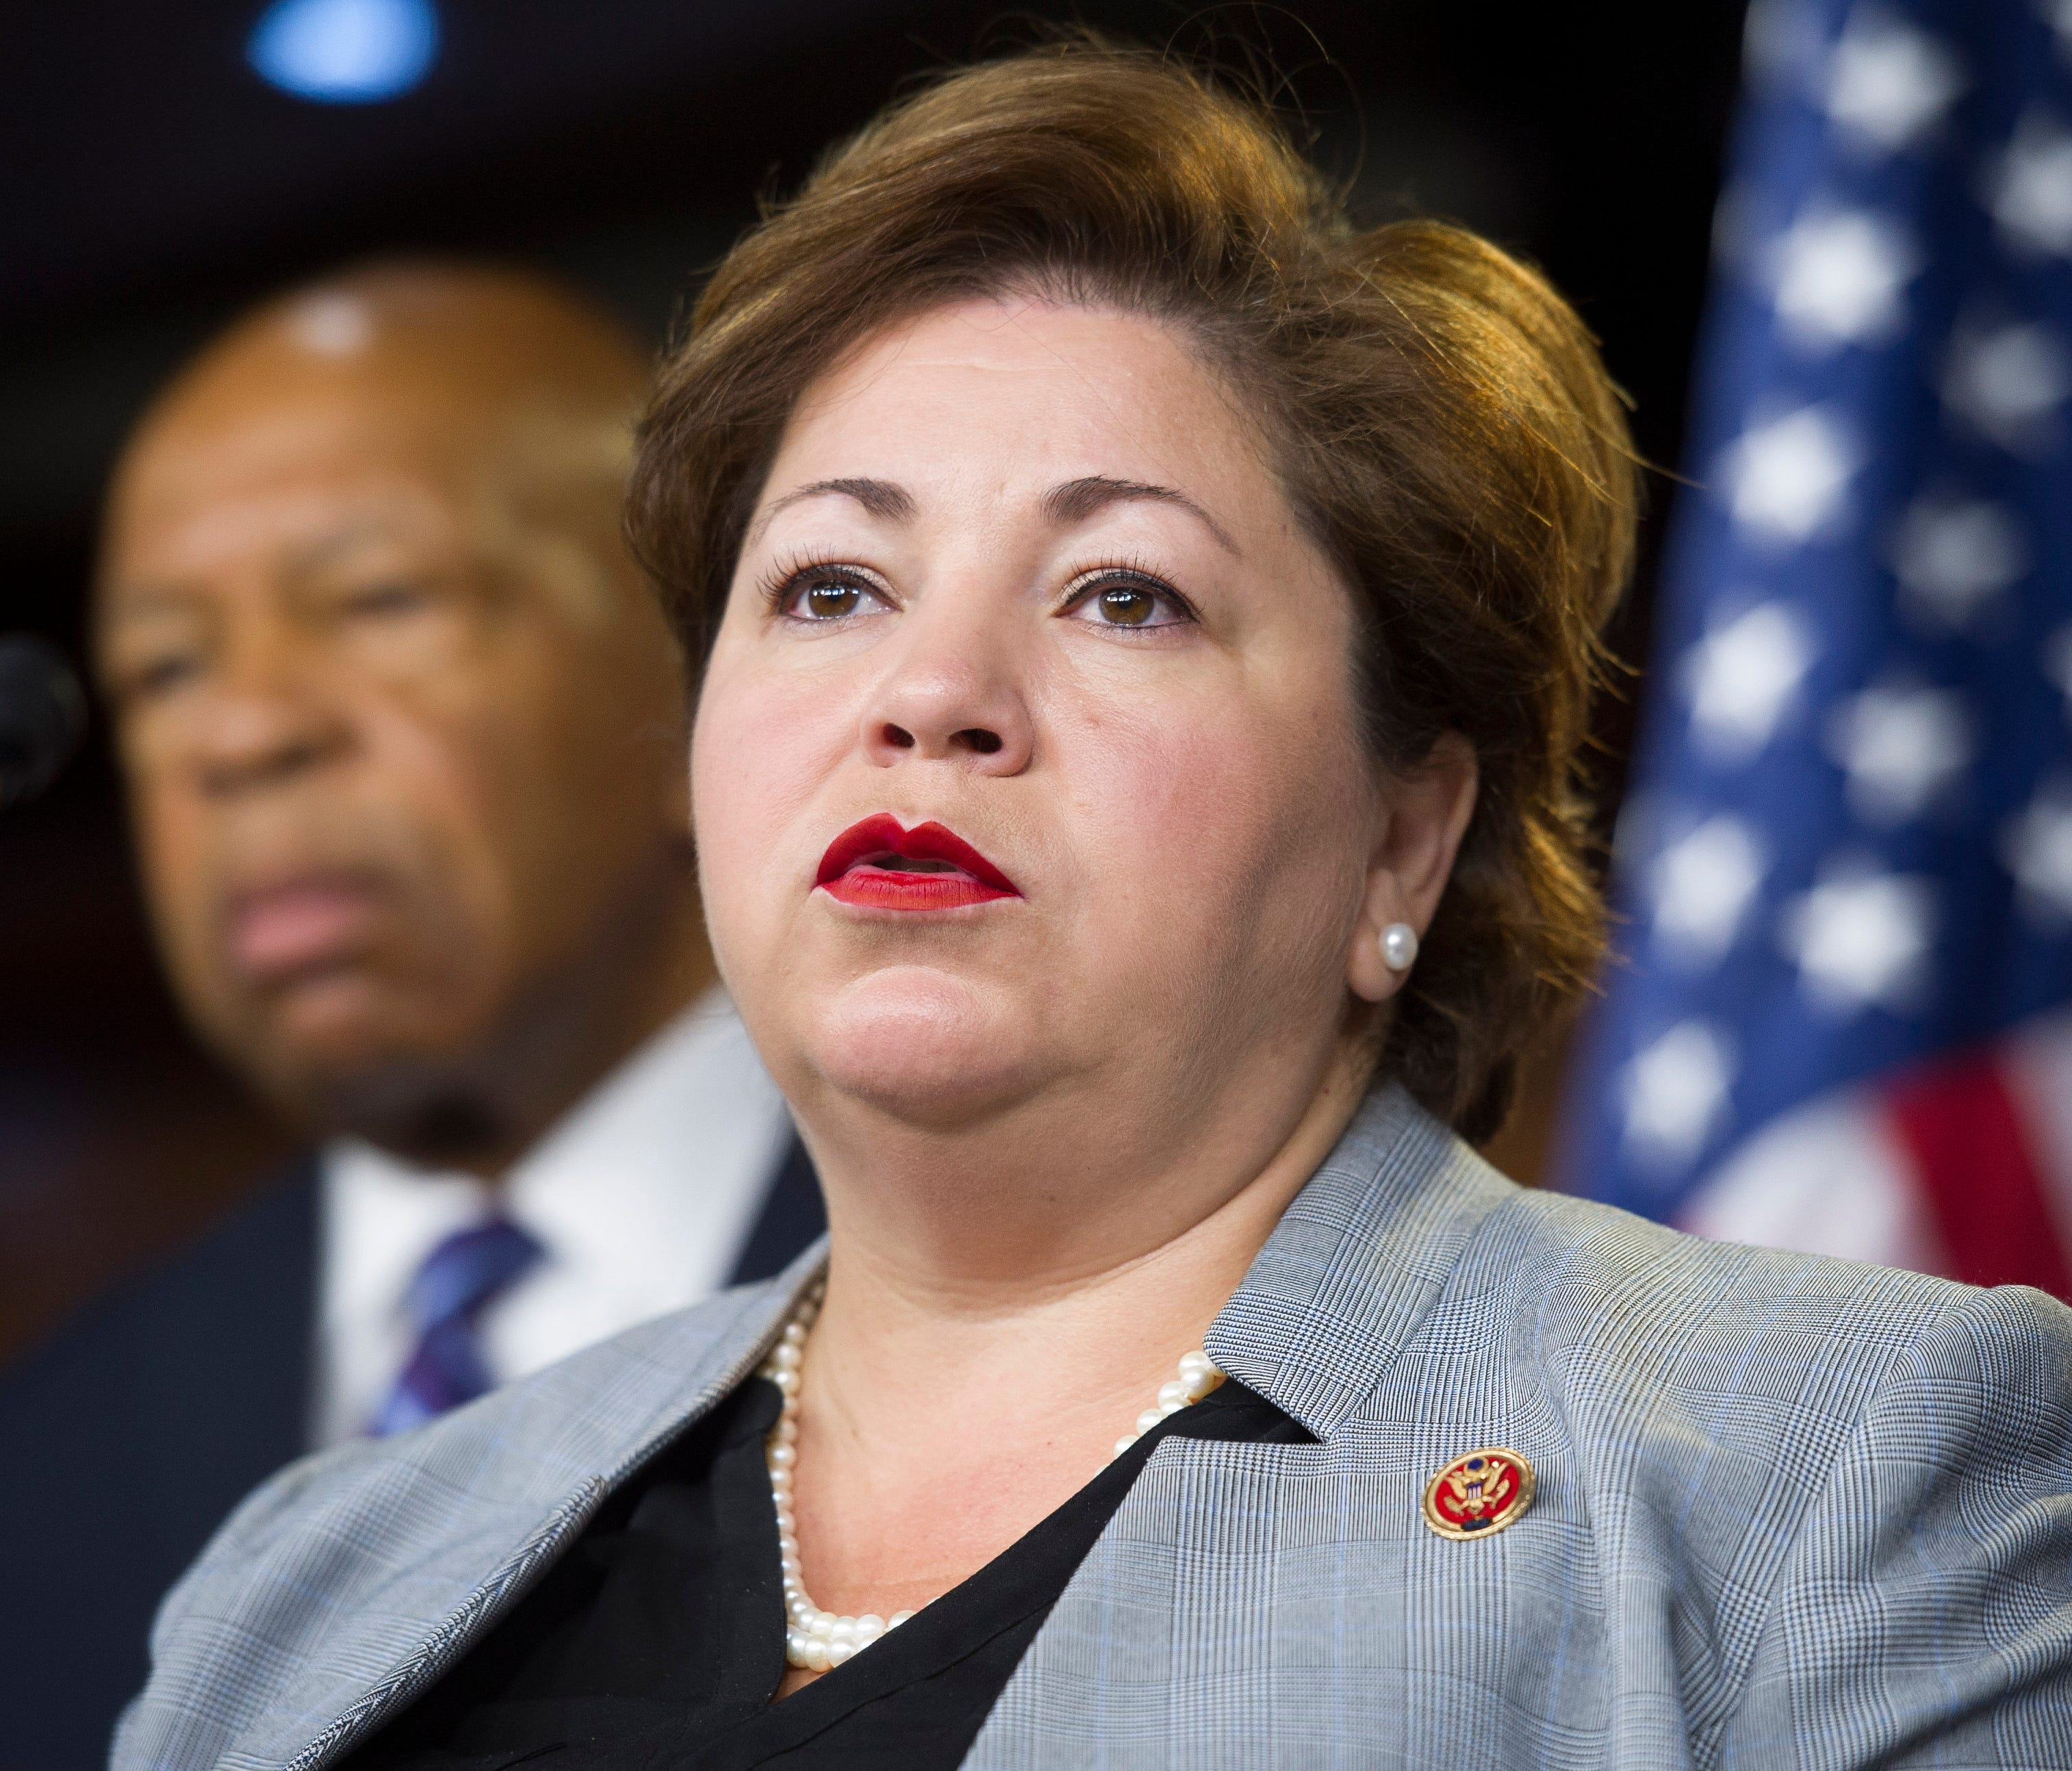 Rep. Linda Sanchez, D-Ca., worked for labor unions before she was elected to Congress in 2002. She is the top Democrat on the House Ethics Committee and also serves on the Ways and Means panel, in addition to the House Select Committee on Benghazi.